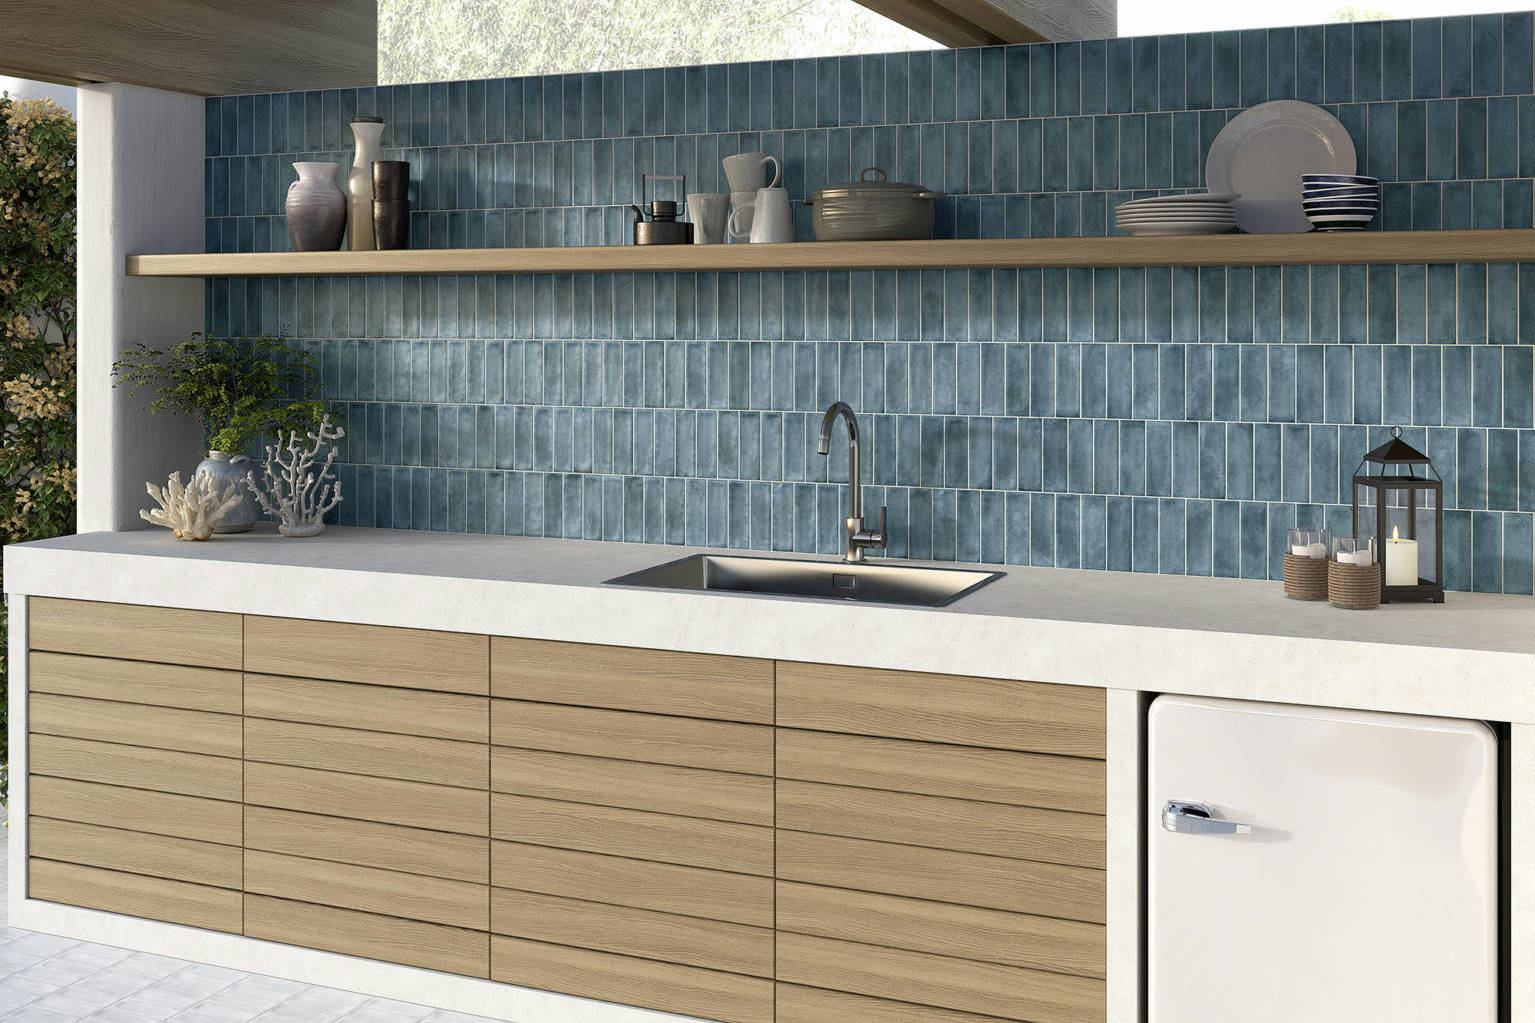 Lisbon 2X6 Blue | Qualis Ceramica | Luxury Tile and Vinyl at affordable prices